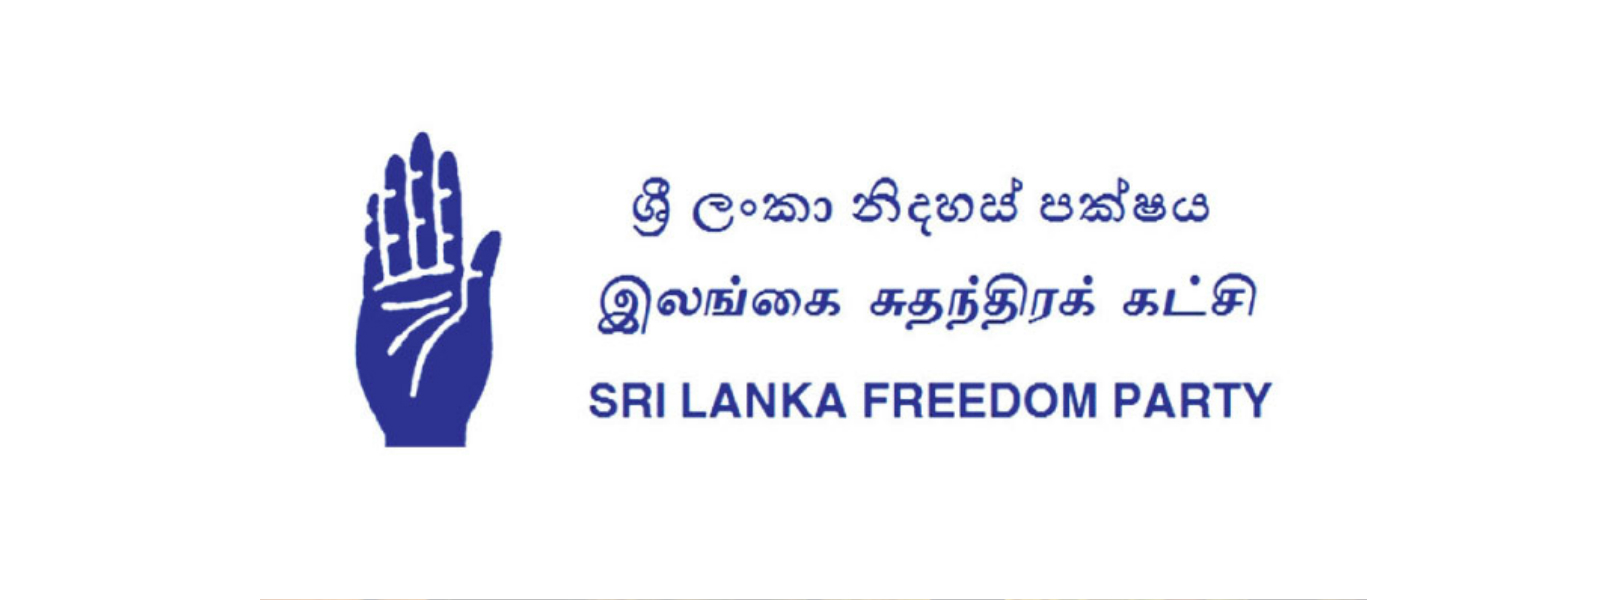 Special SLFP convention announced